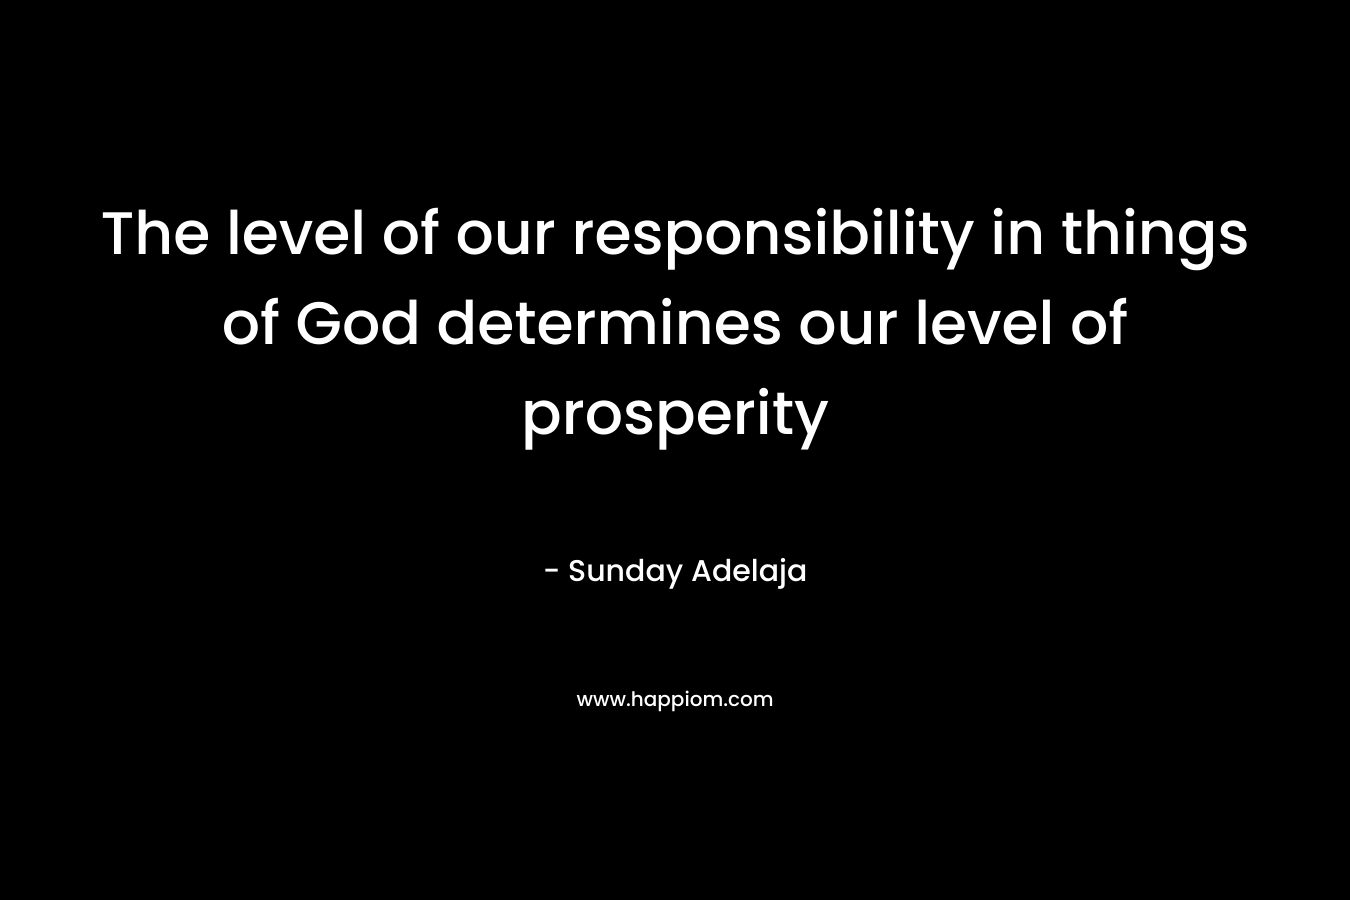 The level of our responsibility in things of God determines our level of prosperity